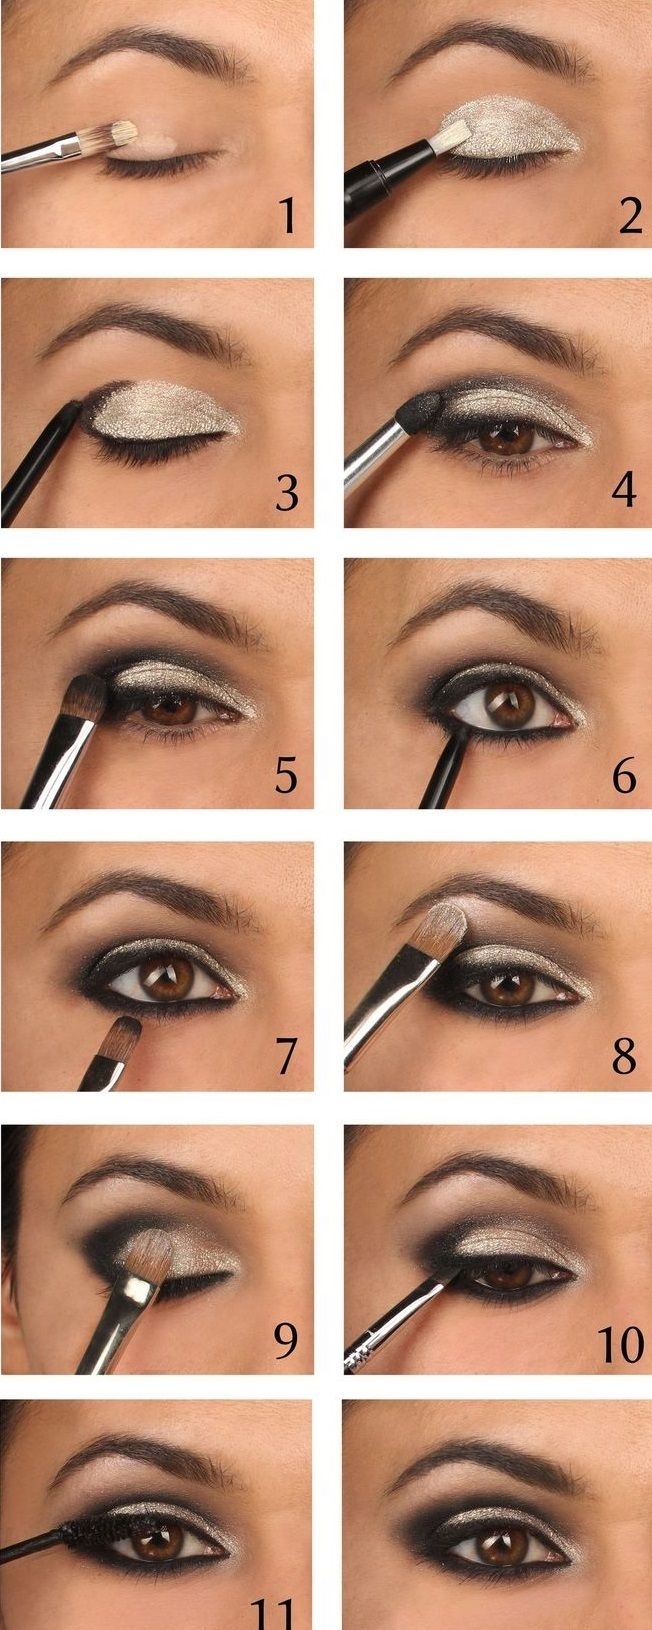 40 Hottest Smokey Eye Makeup Ideas 2020 &amp; Smokey Eye throughout How To Do Smokey Eye Makeup Step By Step With Pictures